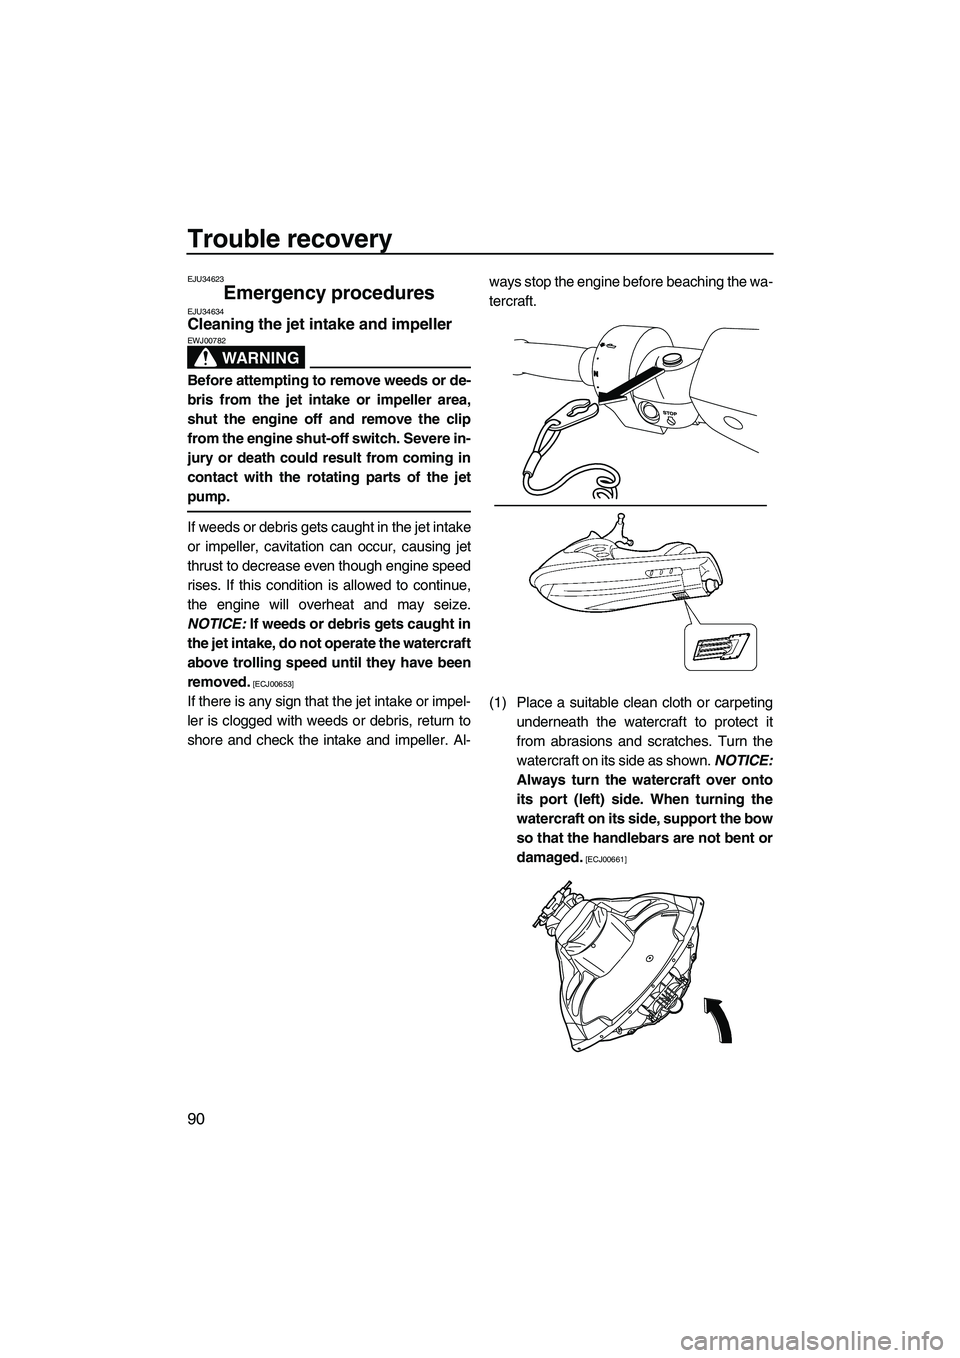 YAMAHA FZR 2012 Owners Guide Trouble recovery
90
EJU34623
Emergency procedures EJU34634Cleaning the jet intake and impeller 
WARNING
EWJ00782
Before attempting to remove weeds or de-
bris from the jet intake or impeller area,
shu